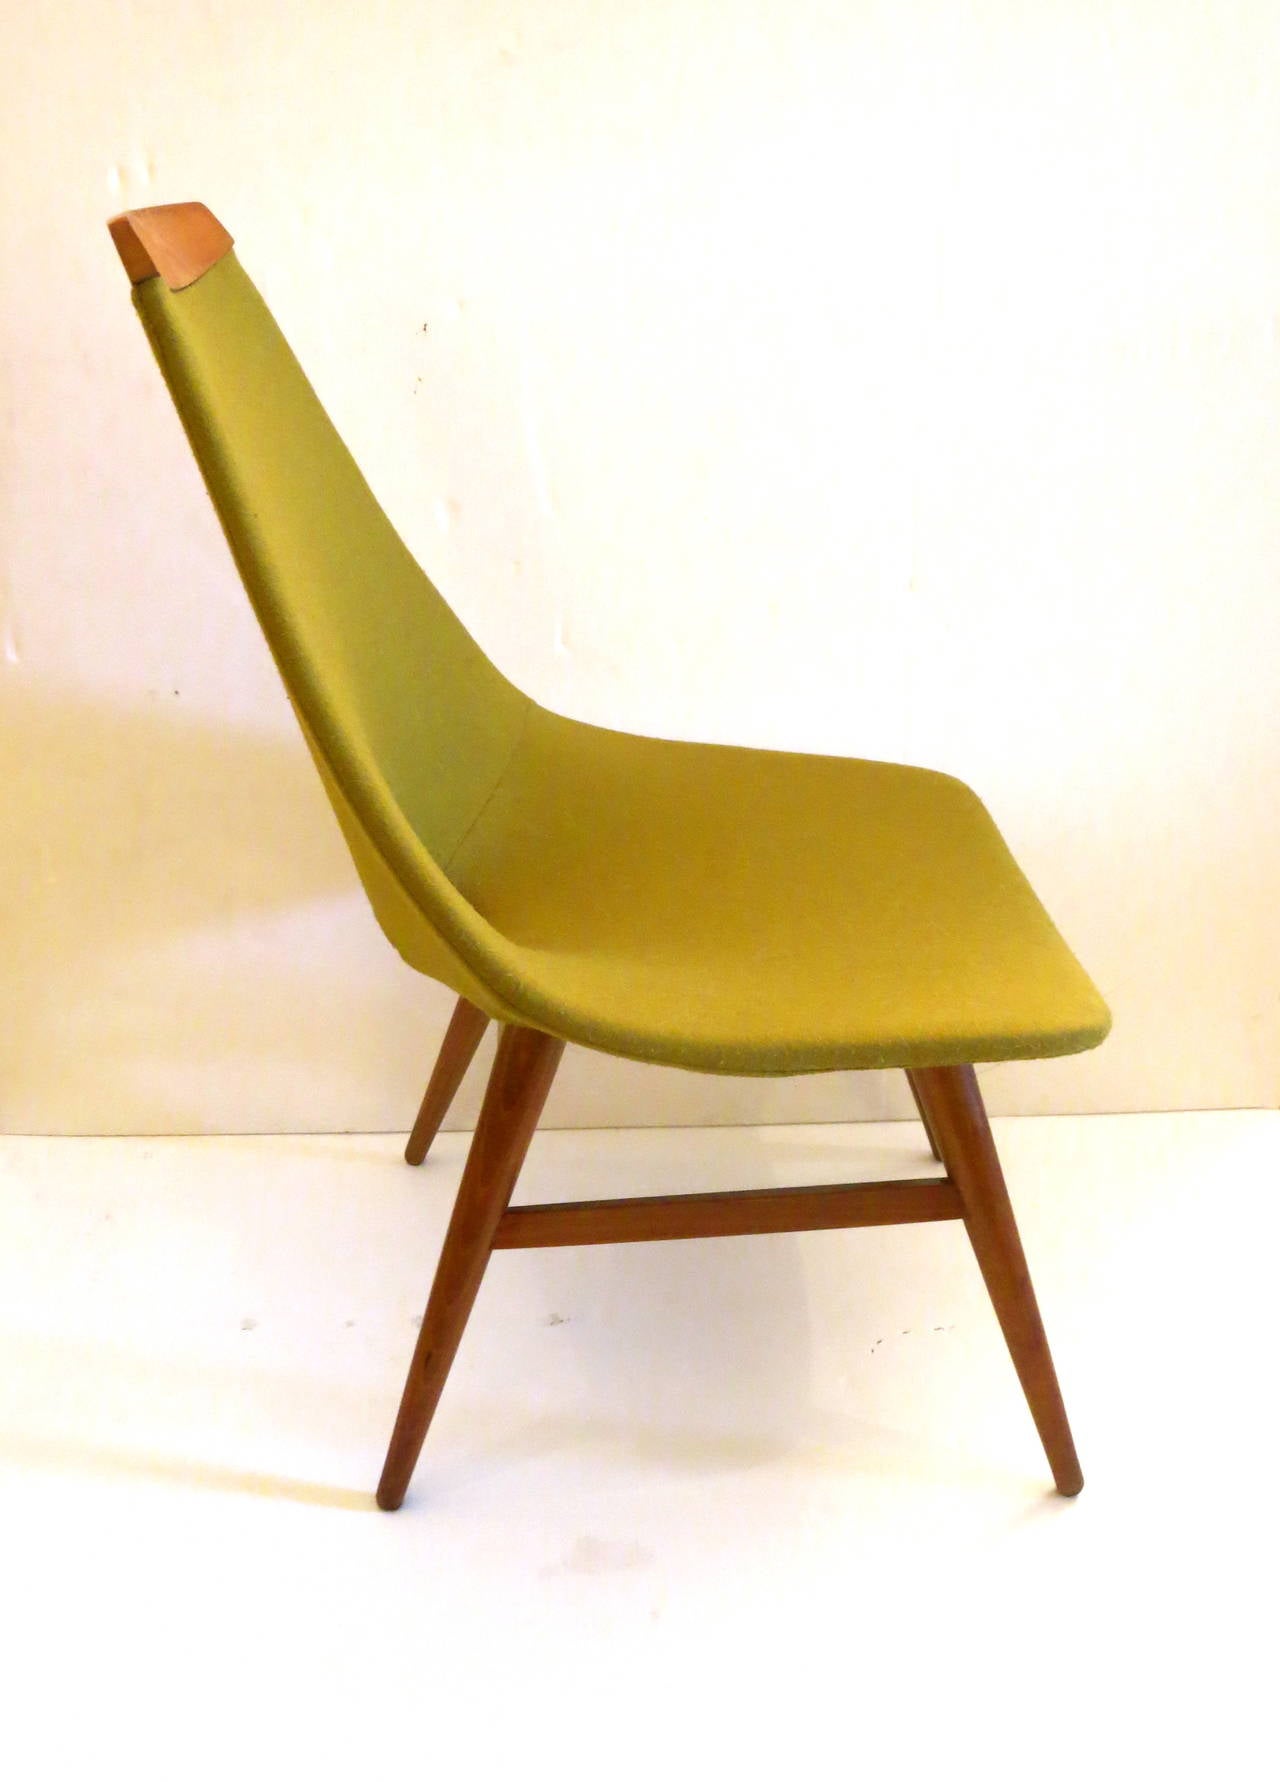 A very rare one of a kind,petite lounge low chair , I belive its American made with walnut base frame and light walnut accent top, circa 1950s all in original lime green fabric , good condition with a couple of light stains , as shown but overall